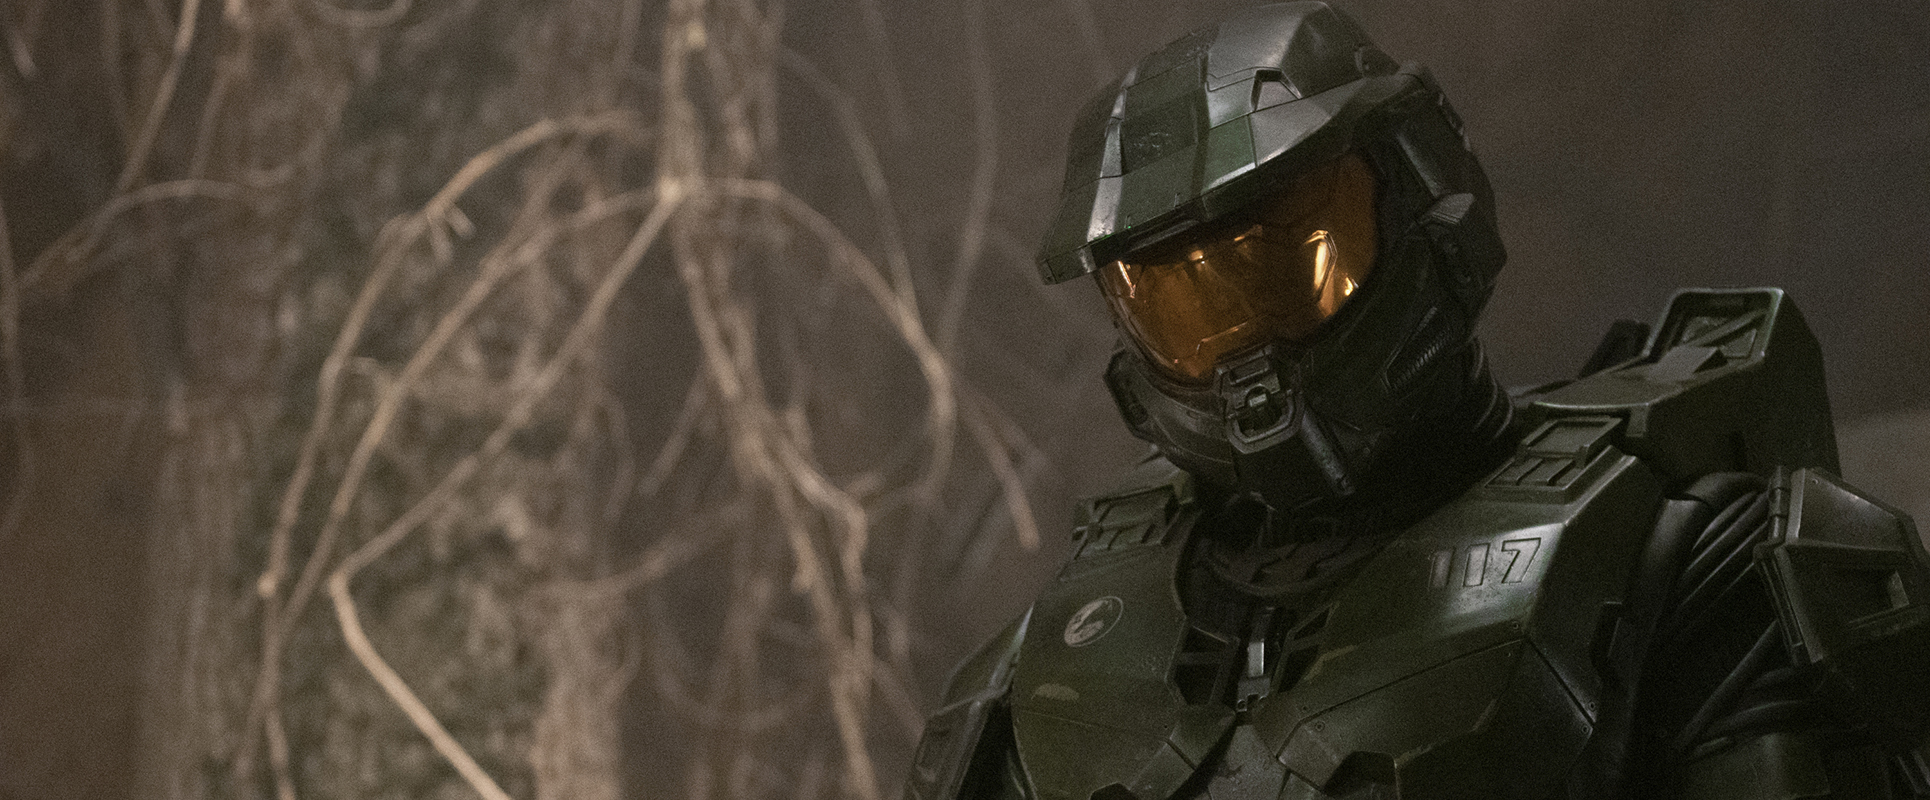 Ready for More Epic Adventures? The Halo Series is the Perfect